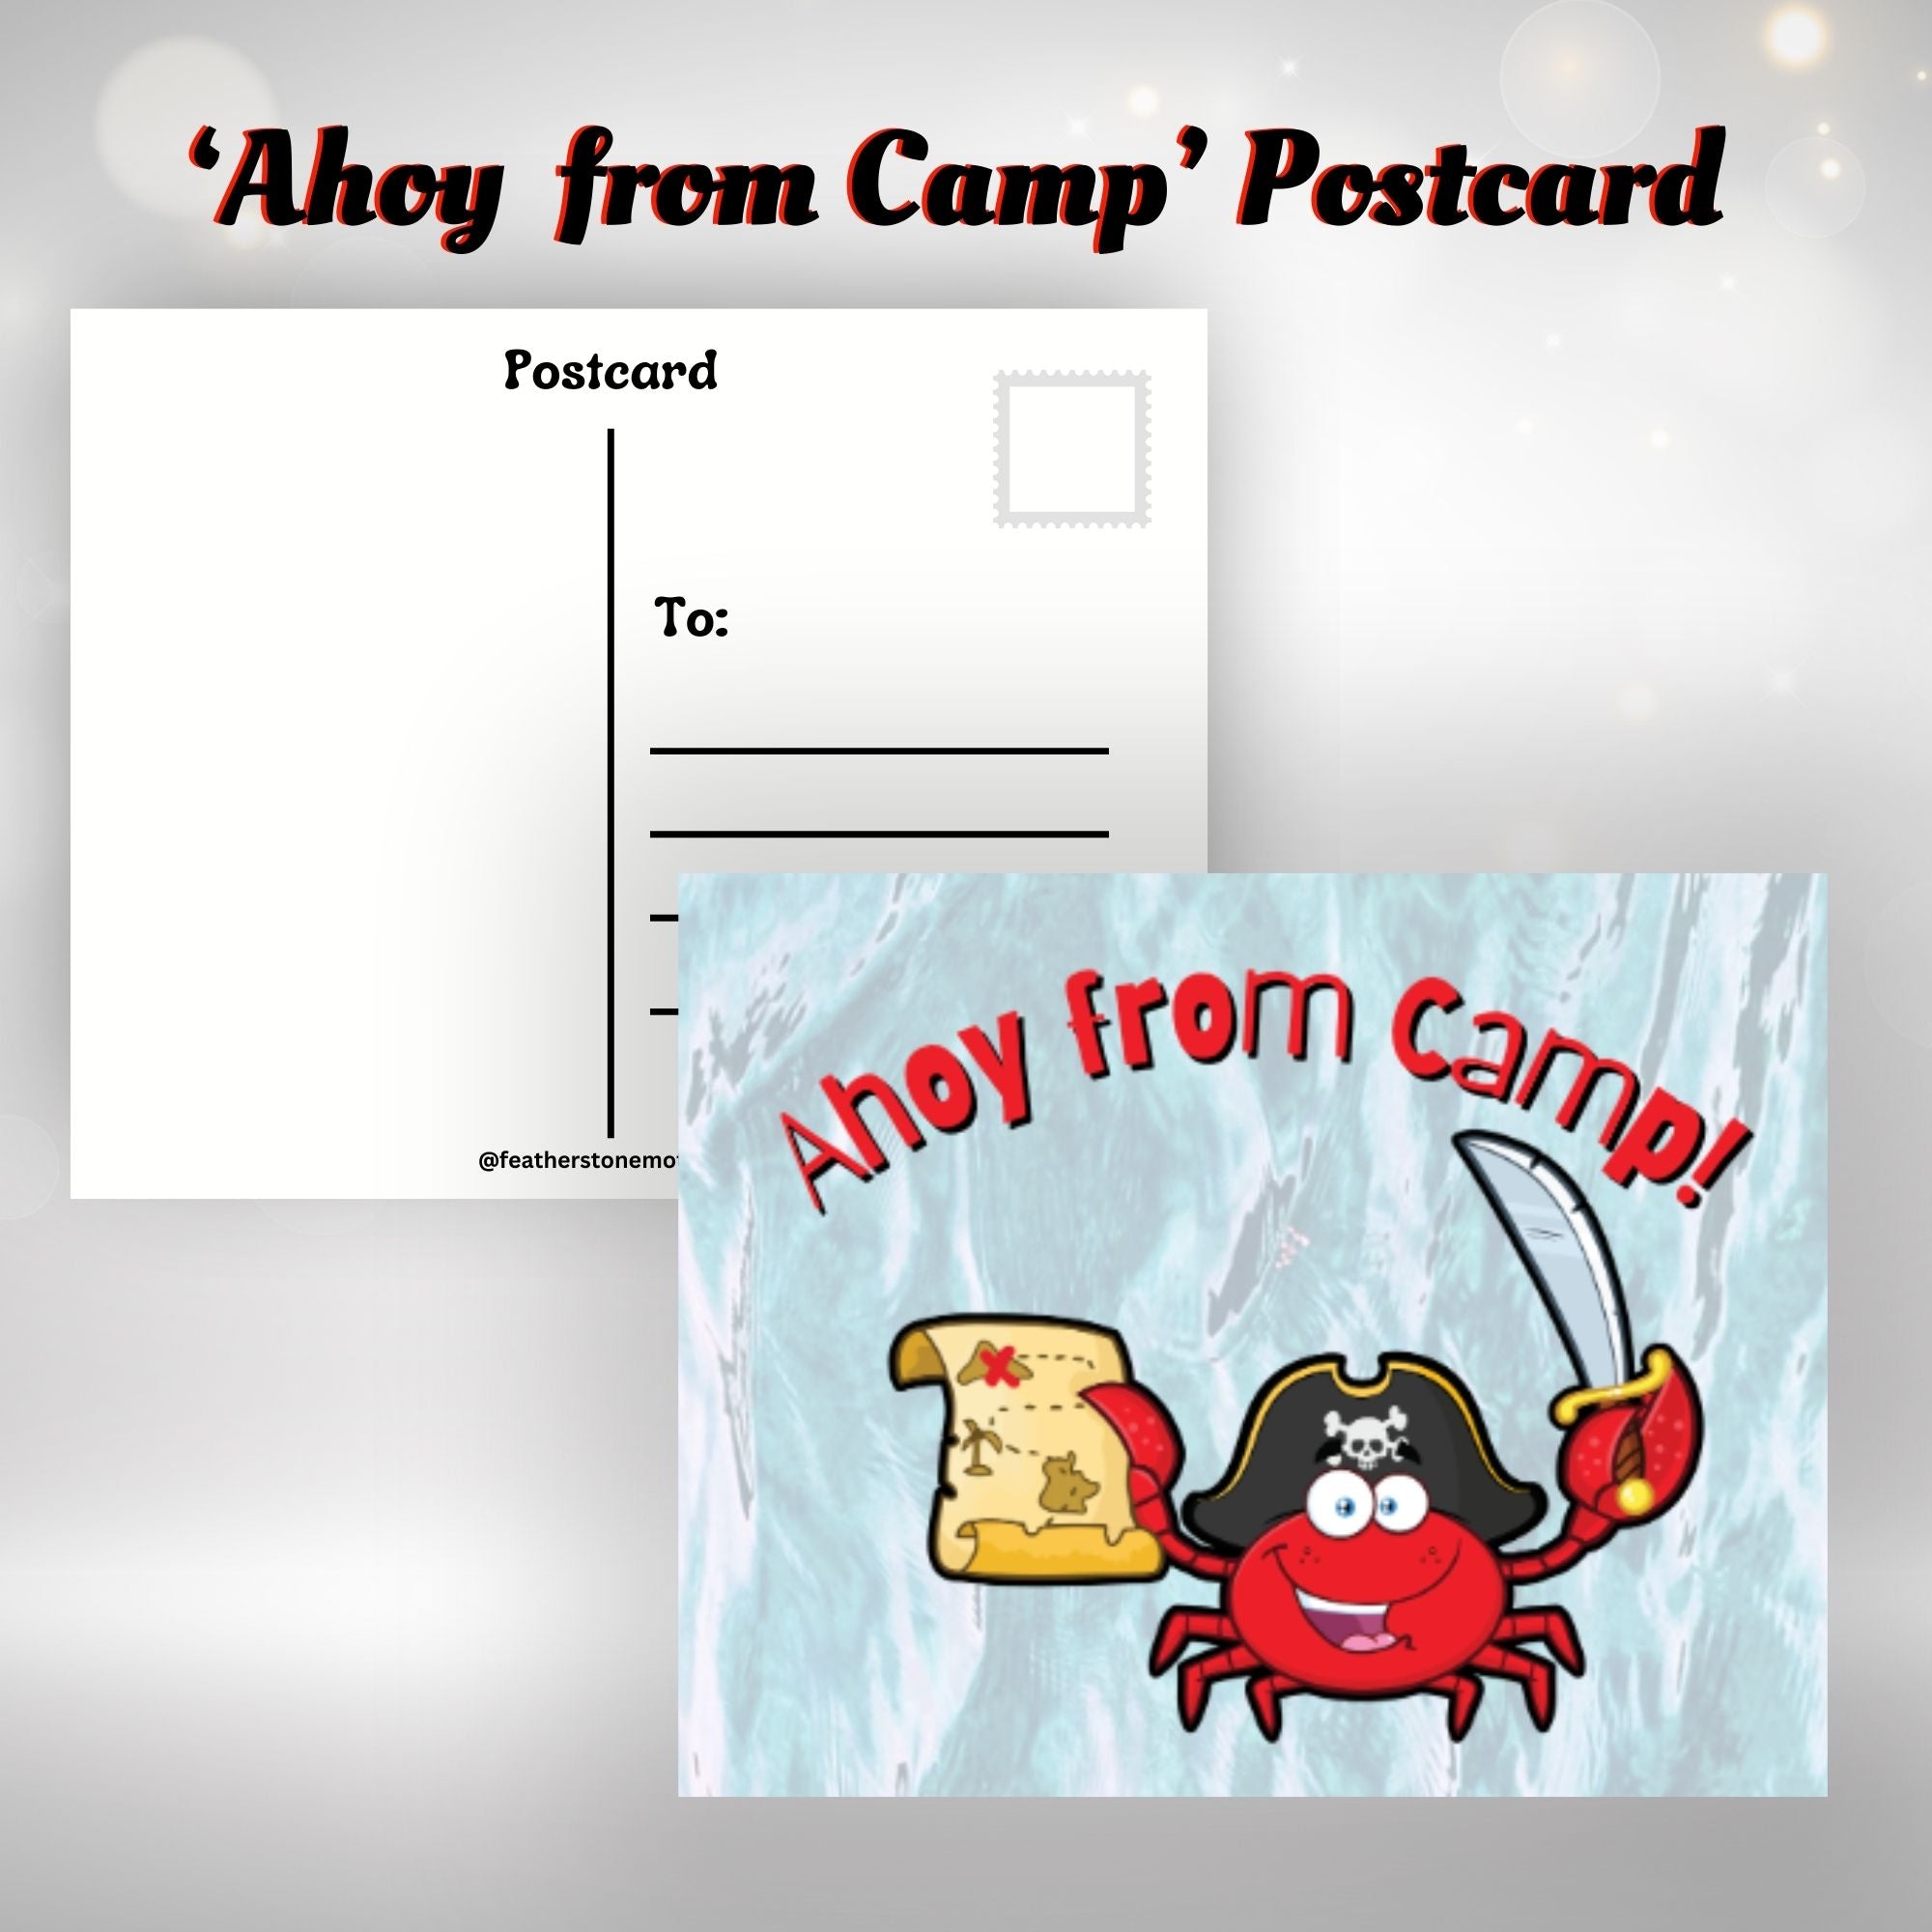 This image shows the Ahoy from Camp! postcard with a pirate crab holding a sword and map.